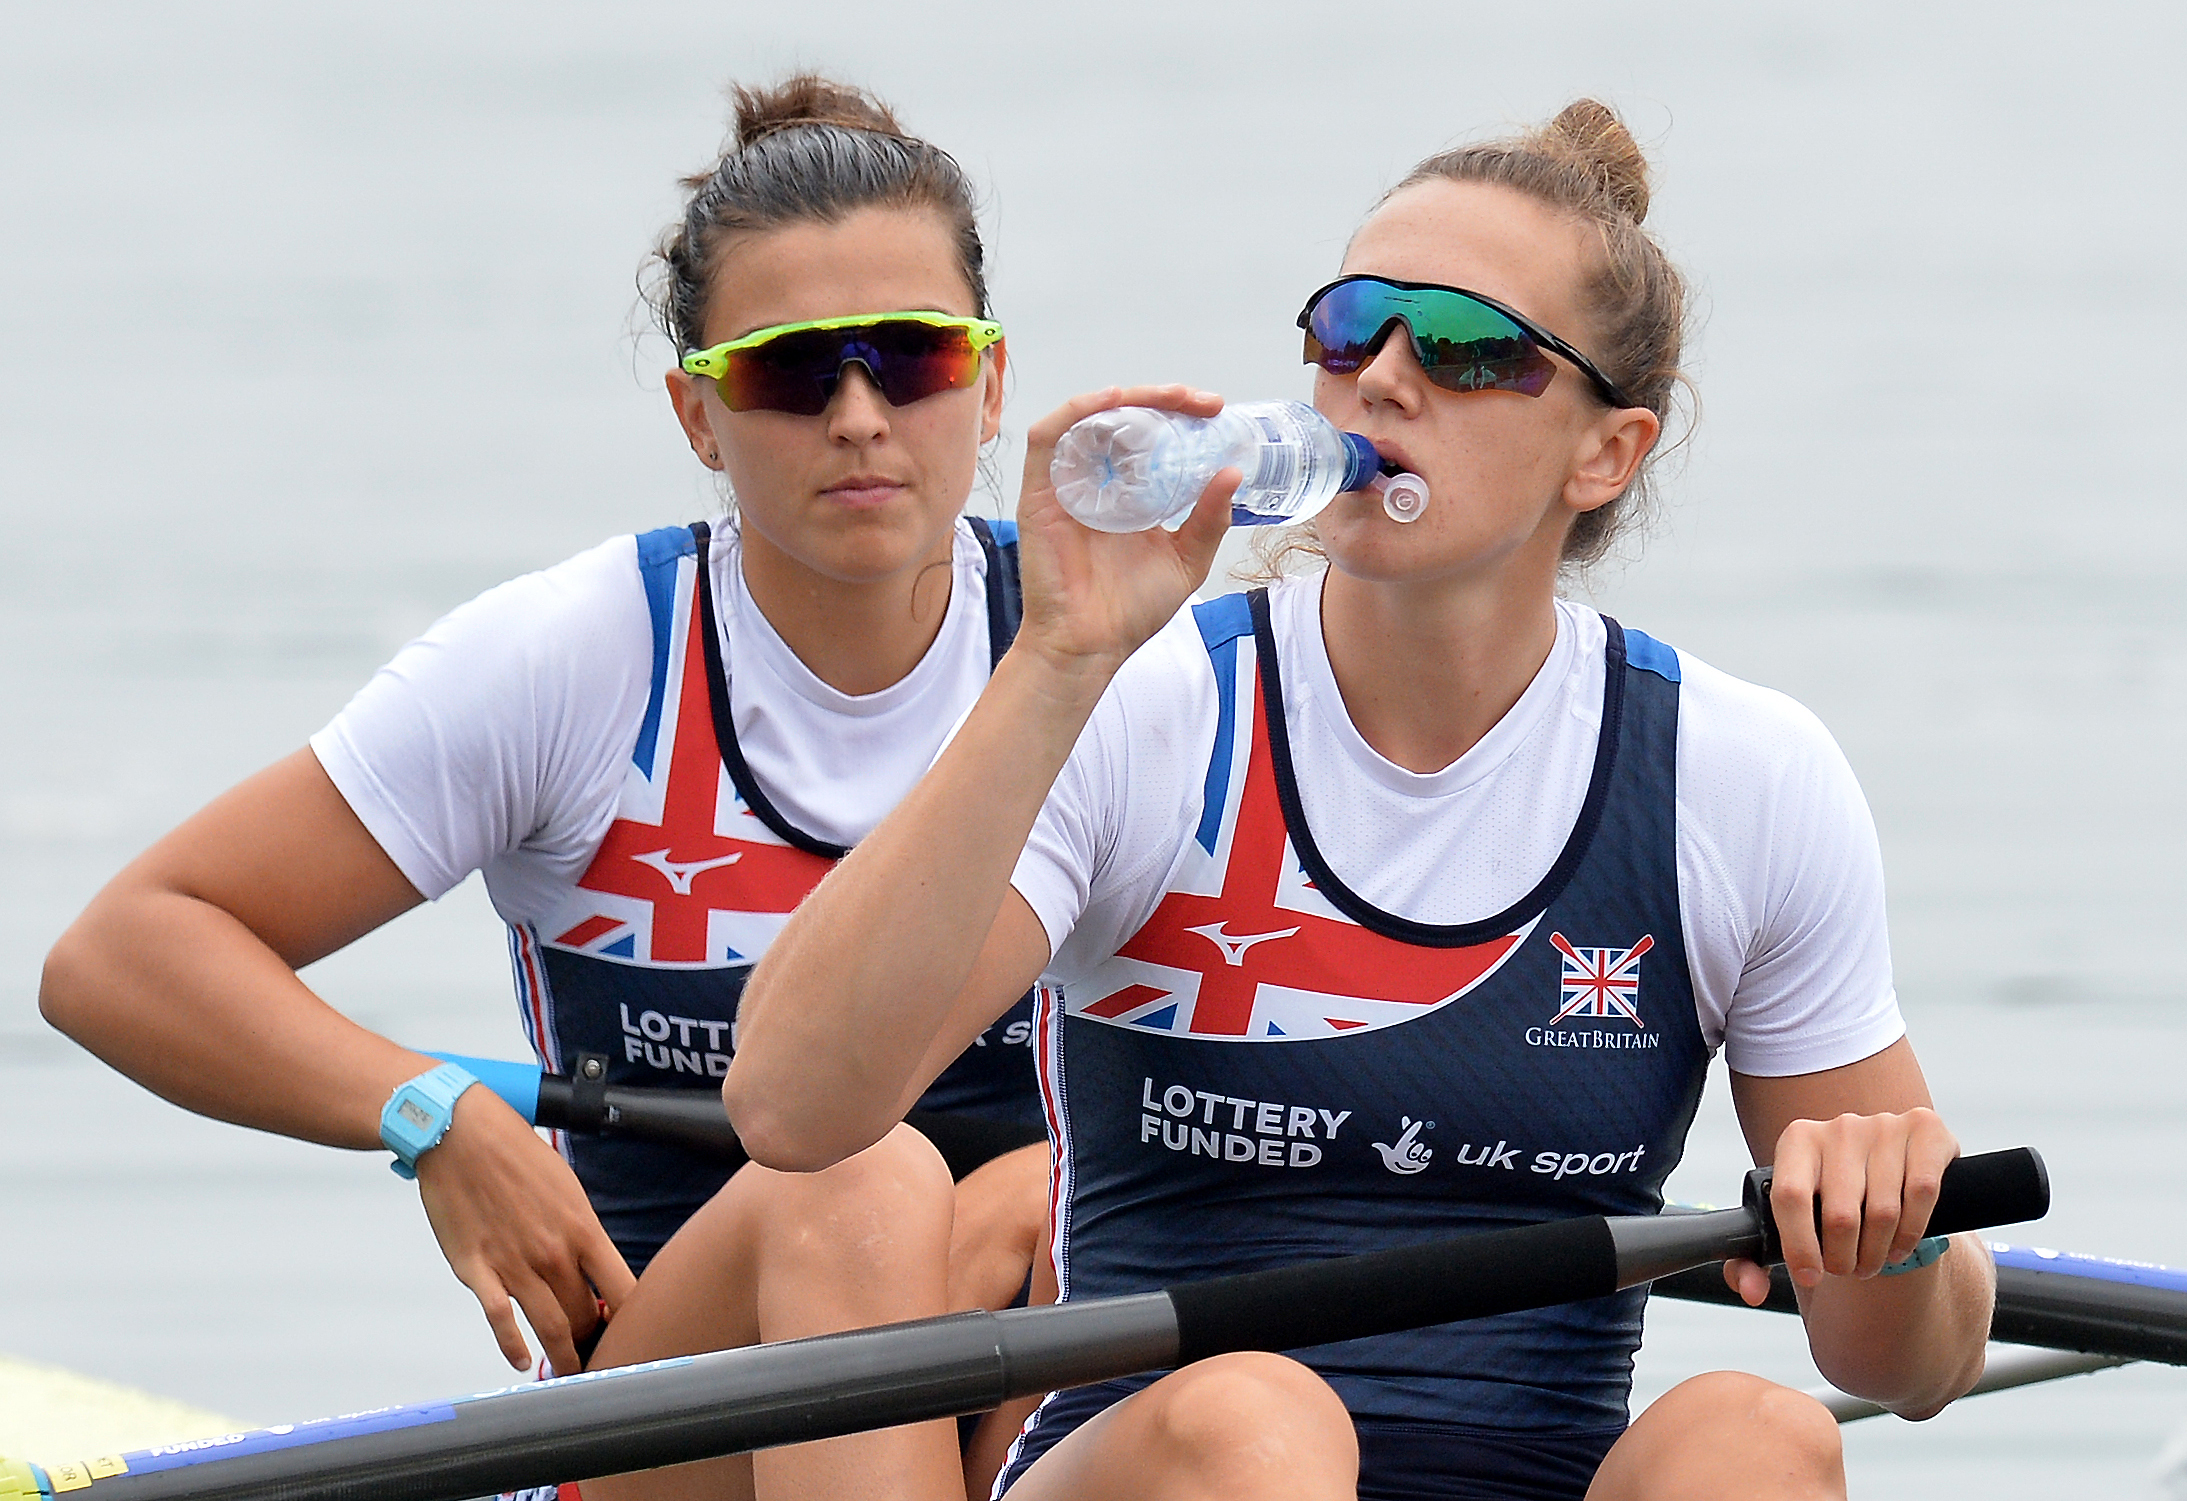 oakley sunglasses for rowing